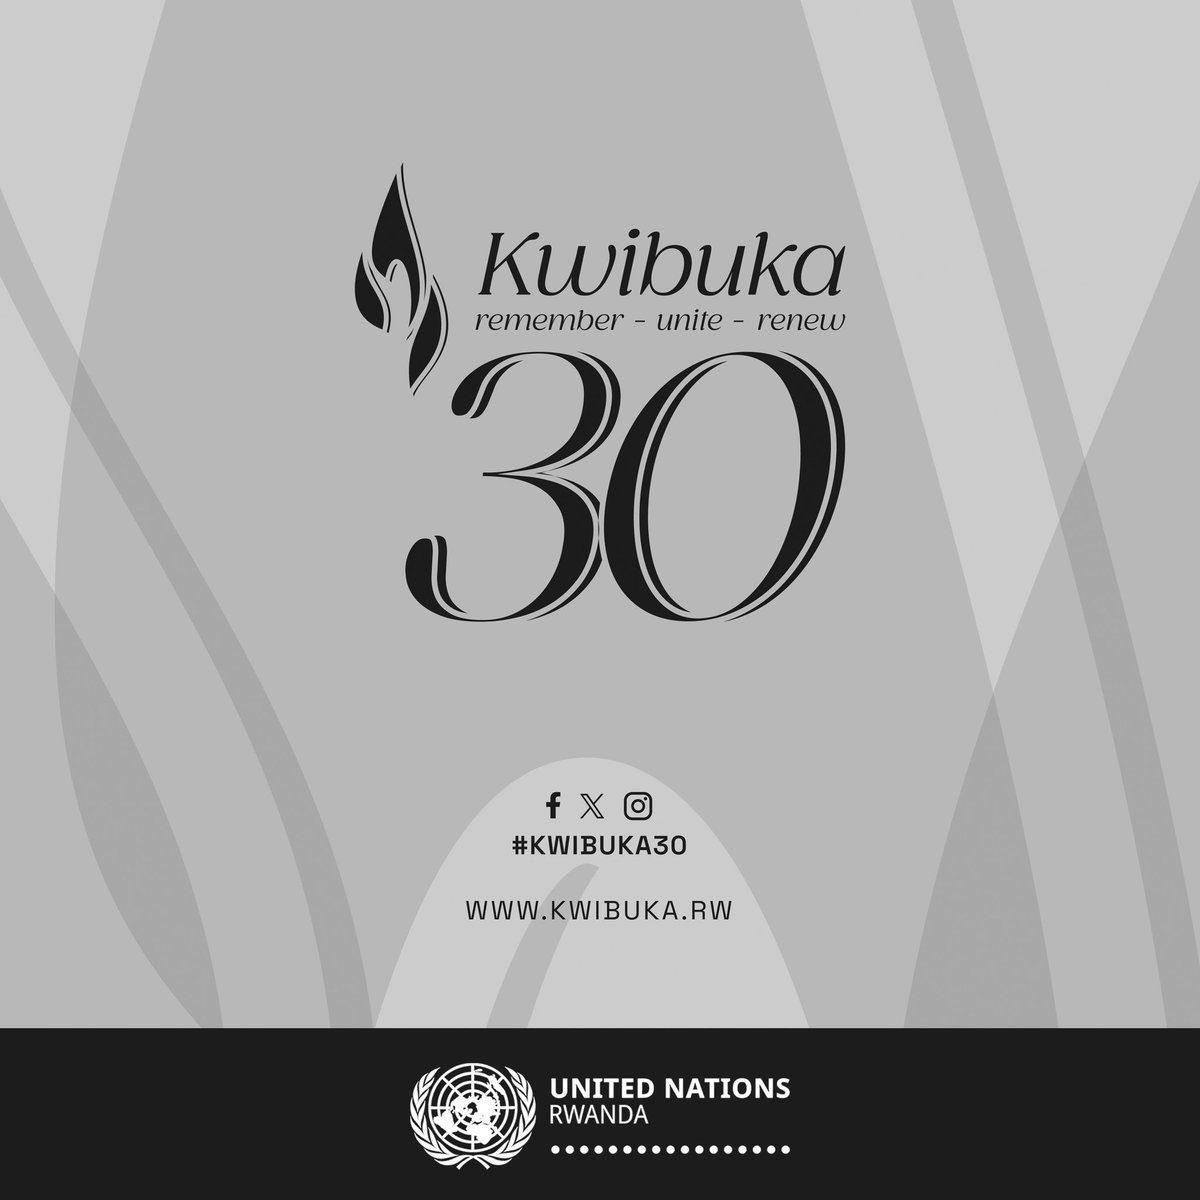 07th April 2024 marks the 30th Commemoration of the 1994 Genocide against the Tutsi. In solidarity, we honor the memory of the more than one million lives lost and pay tribute to the survivors who endured unimaginable suffering. Remember-Unite-Renew